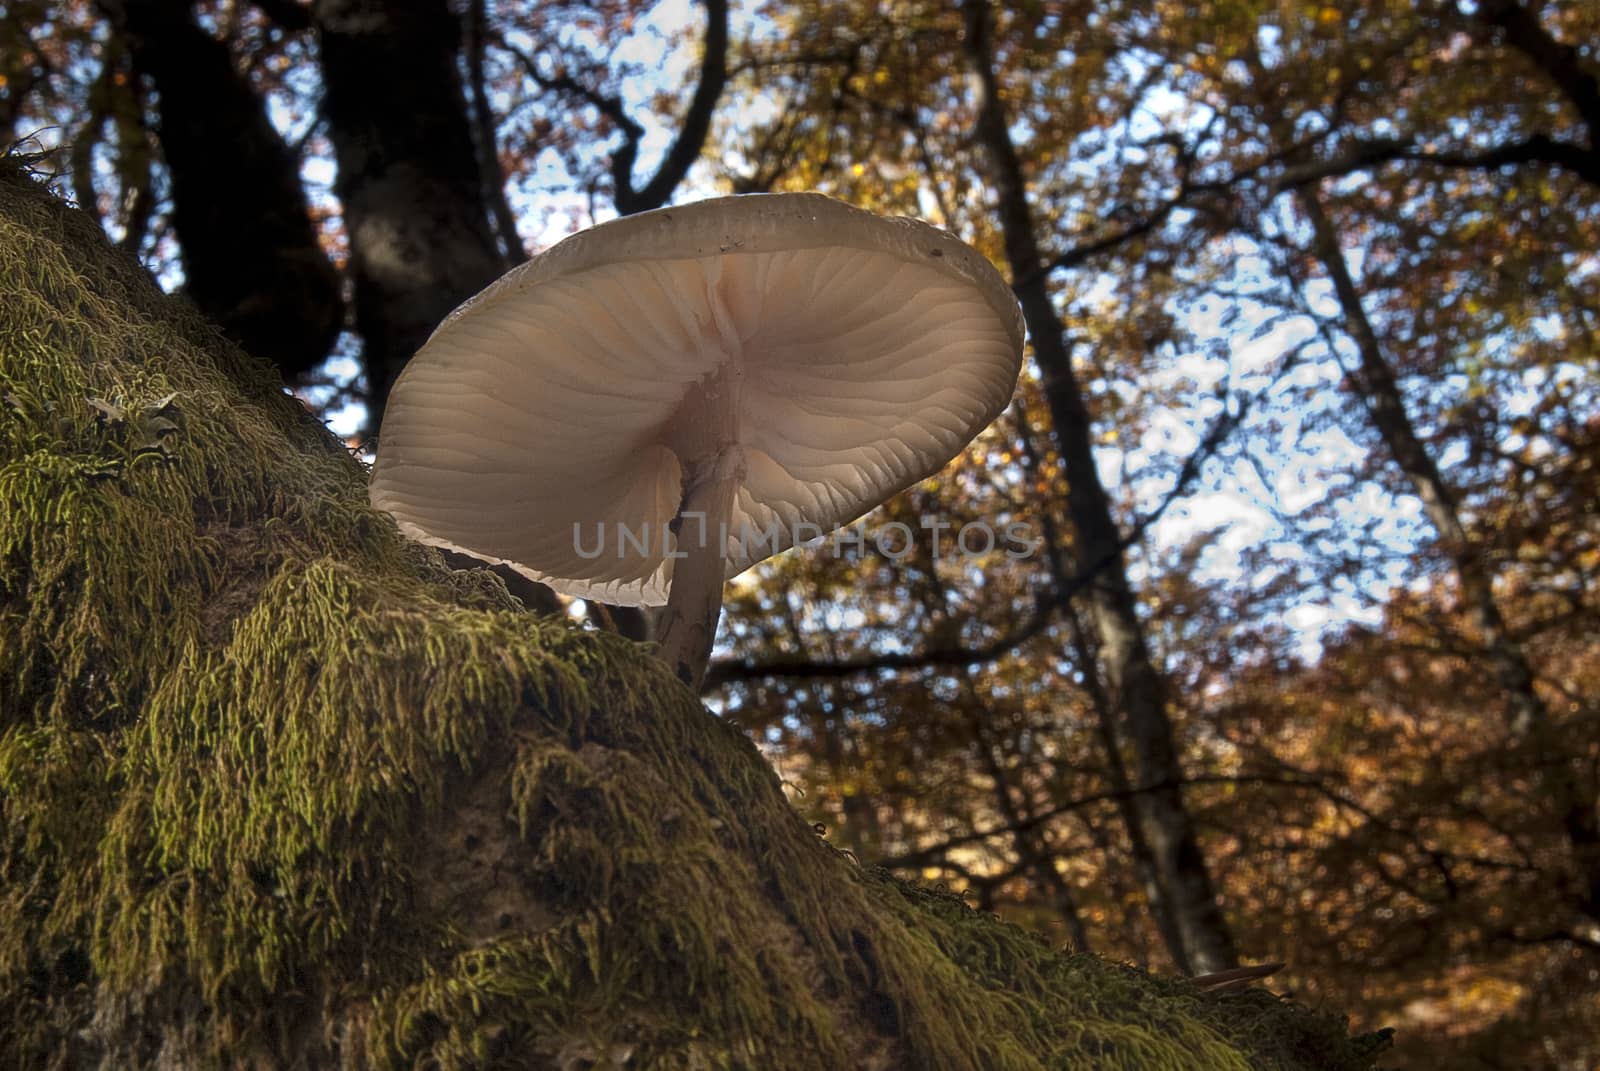 fungus in beech forest by jalonsohu@gmail.com